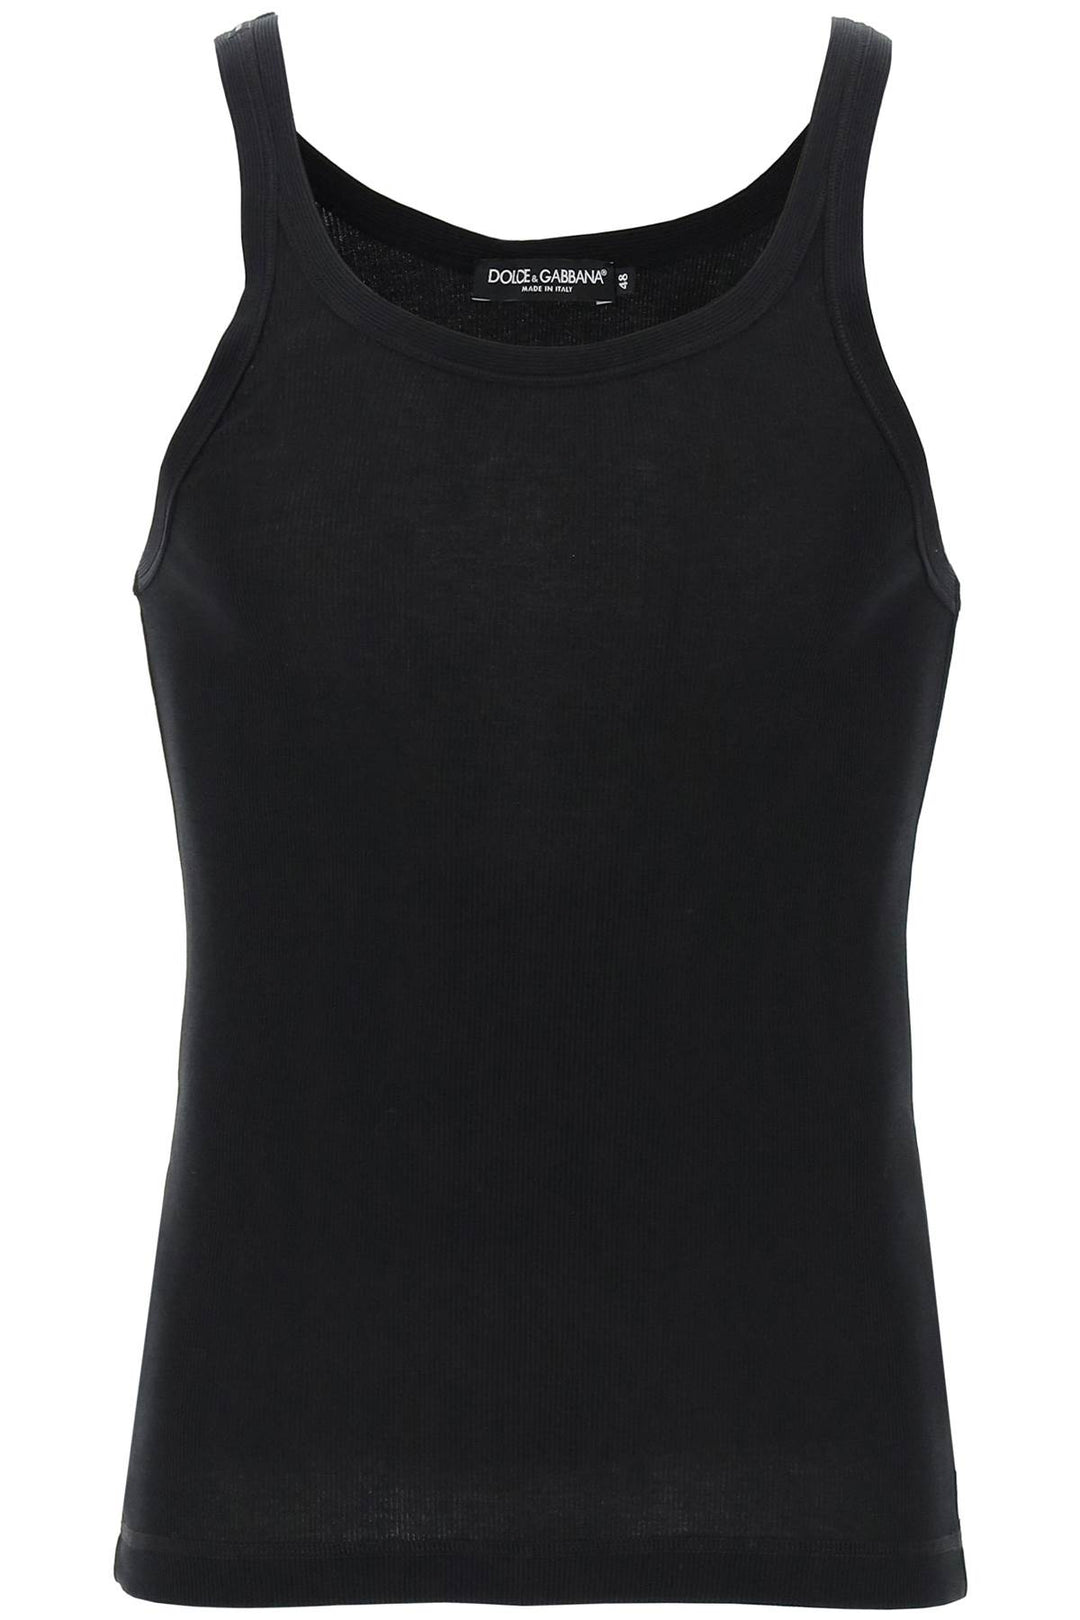 Dolce & Gabbana Replace With Double Quoteribbed Slim Shoulder Tank Top   Nero